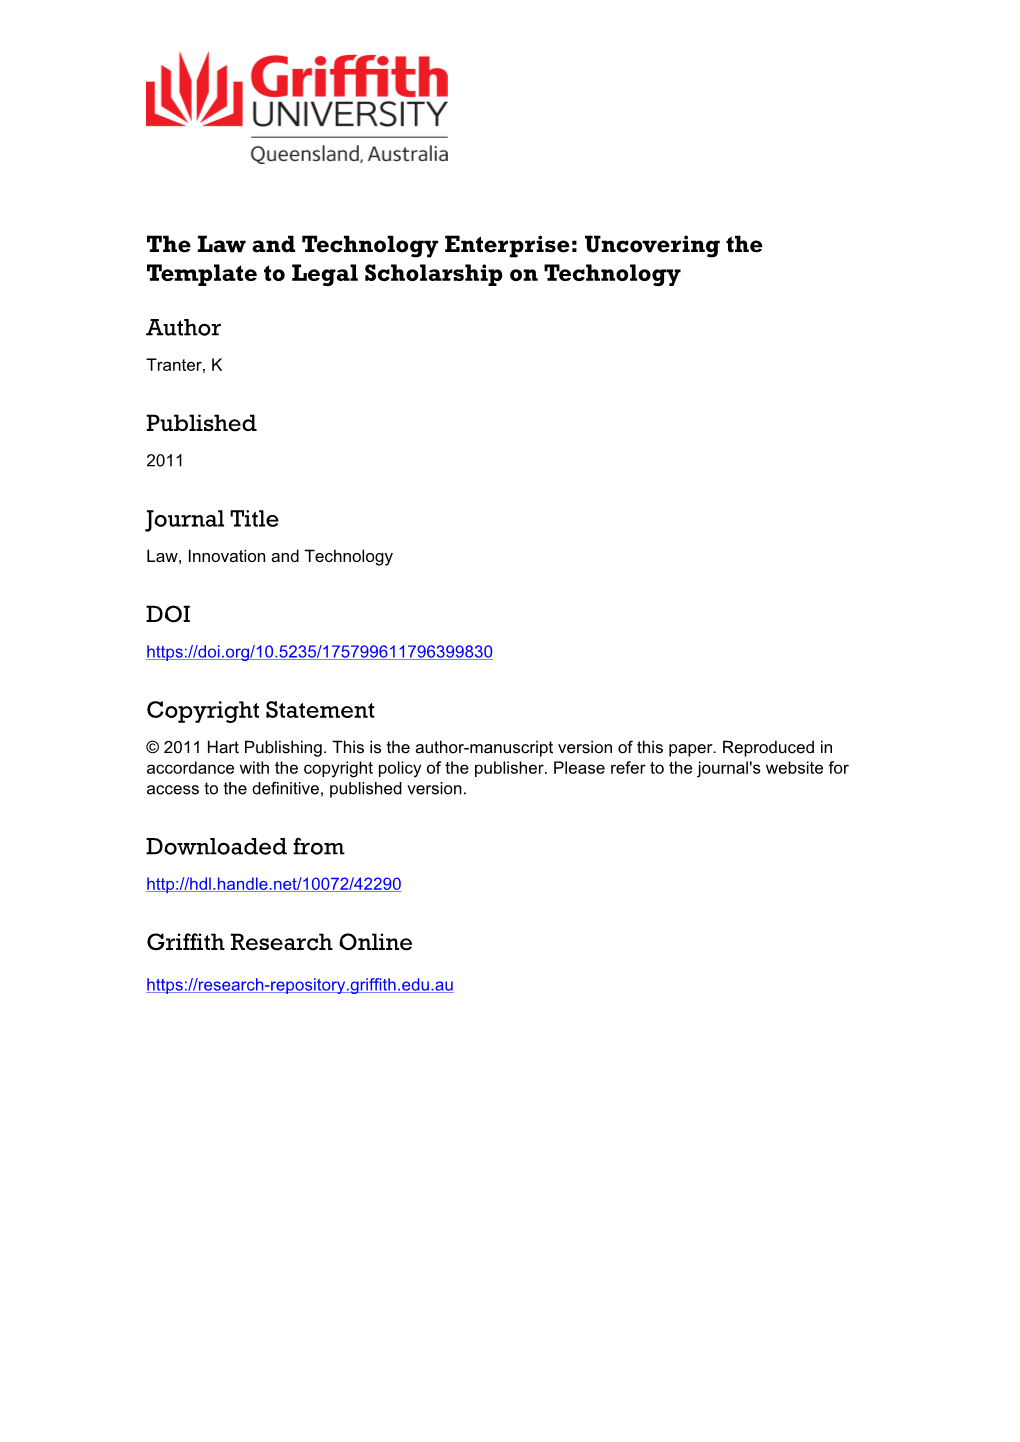 The Law and Technology Enterprise: Uncovering the Template to Legal Scholarship on Technology